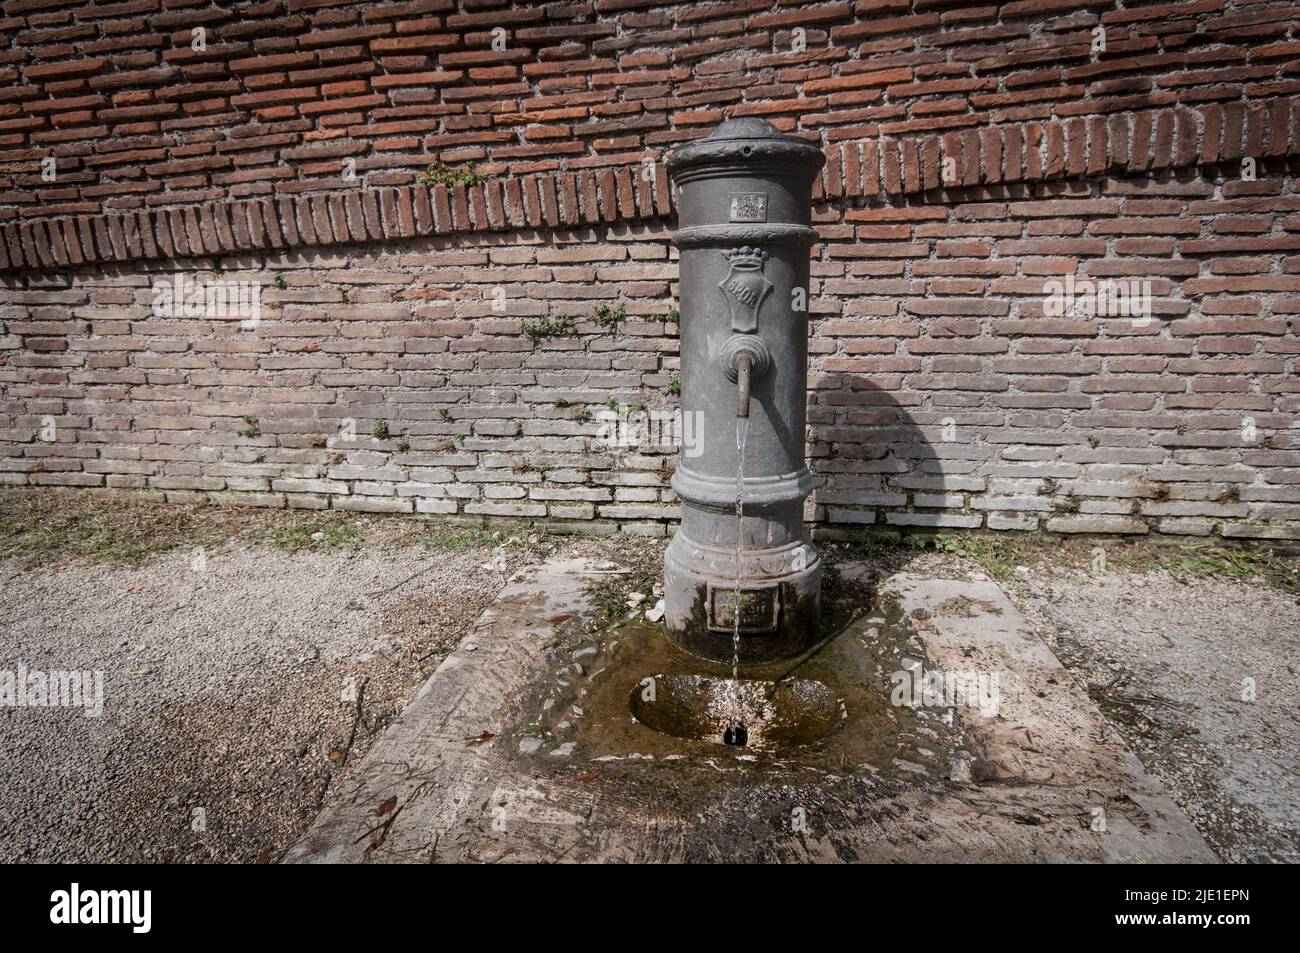 A fountain in Rome. Lazio on 20 June declared a state of calamity for drought that has hit the central Italian region and many others, especially in the north. Lazio Governor Nicola Zingaretti said the move was aimed at taking measures such as saving water in all activities starting with household consumption. A drought alert has spread from the Po valley, where waters are three quarters down amid the worst drought in 70 years, to central rivers like the Arno, the Aniene and the Tiber, which have half the water they normally do at this time of the year, officials said last week. While Lombardy Stock Photo